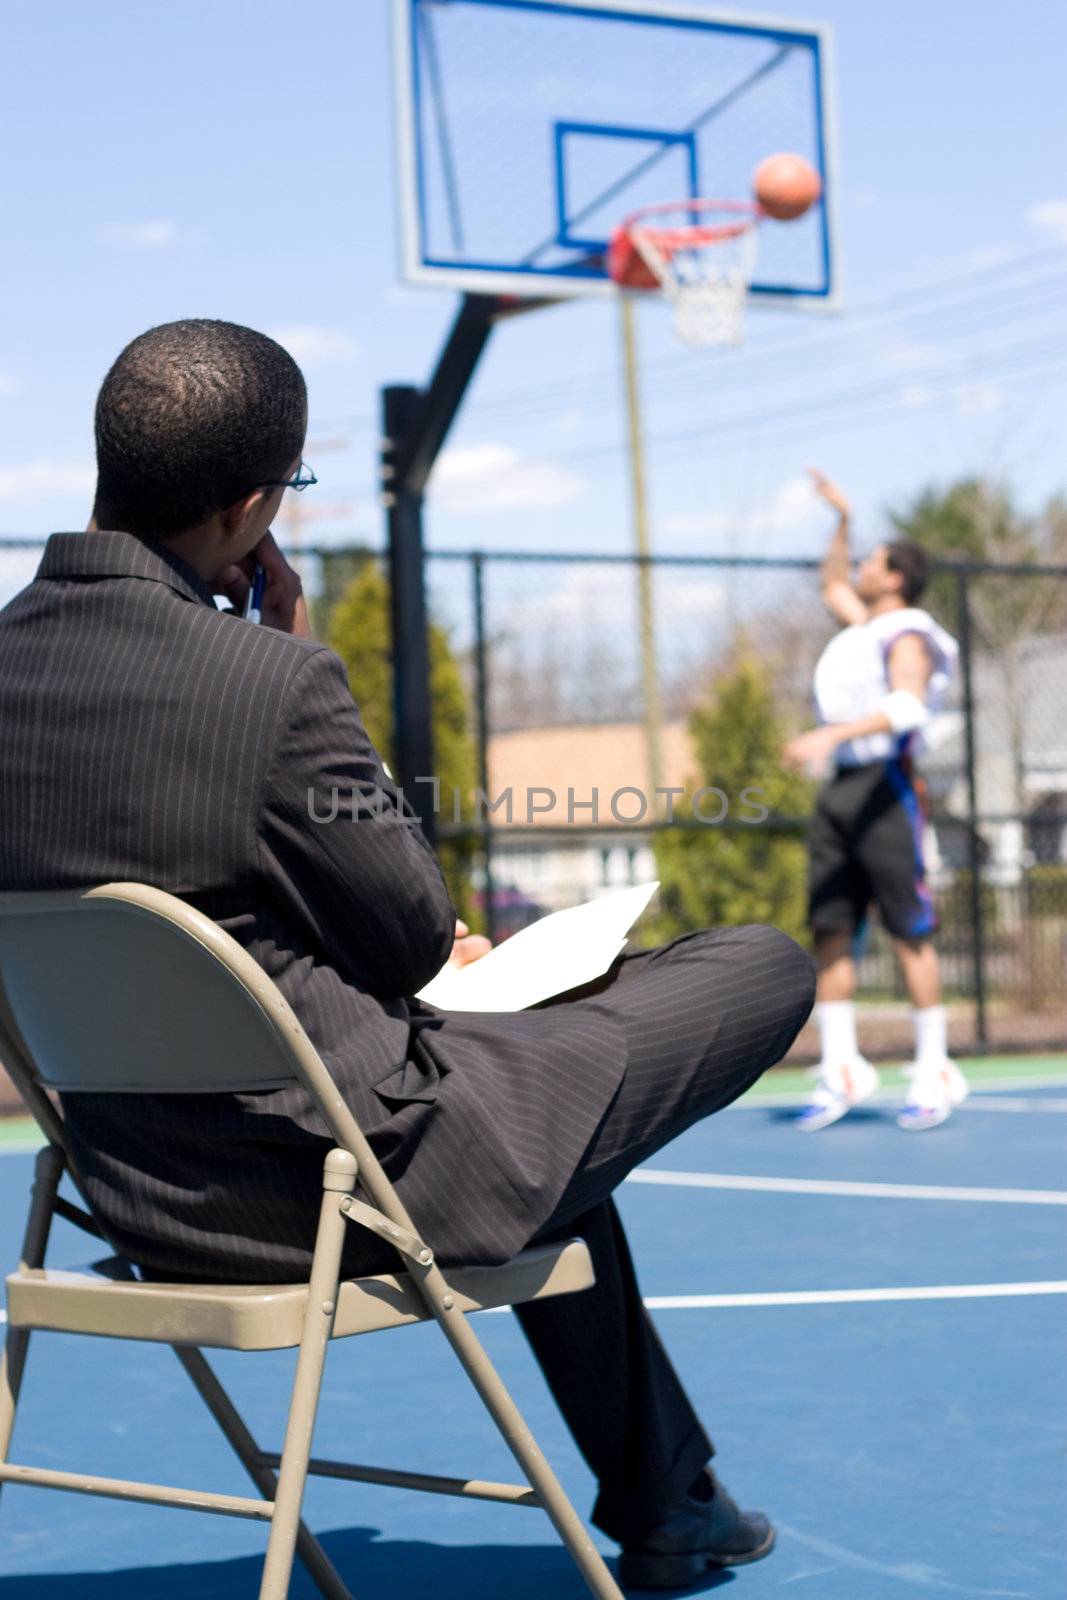 A basketball coach or scout recruiter observes an athlete while he warms up.